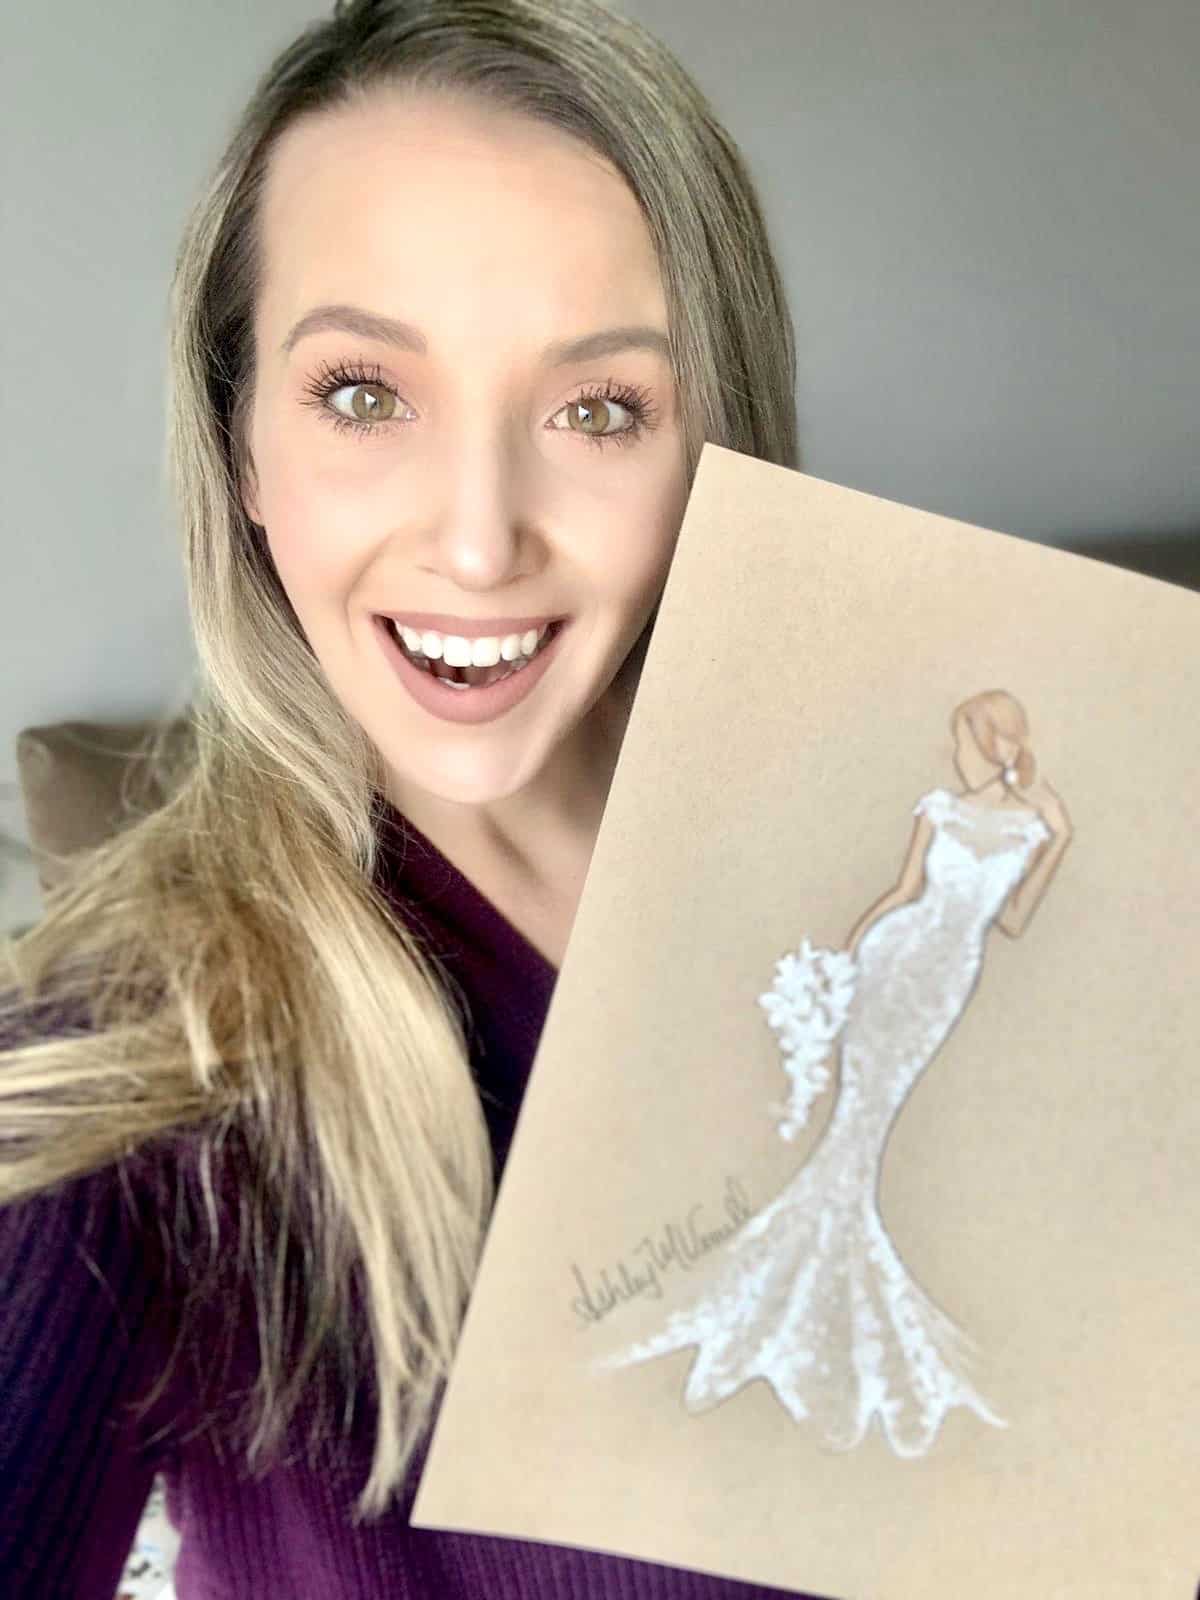 Bride Holding Bridal Illustration Purchased for Her as Gift